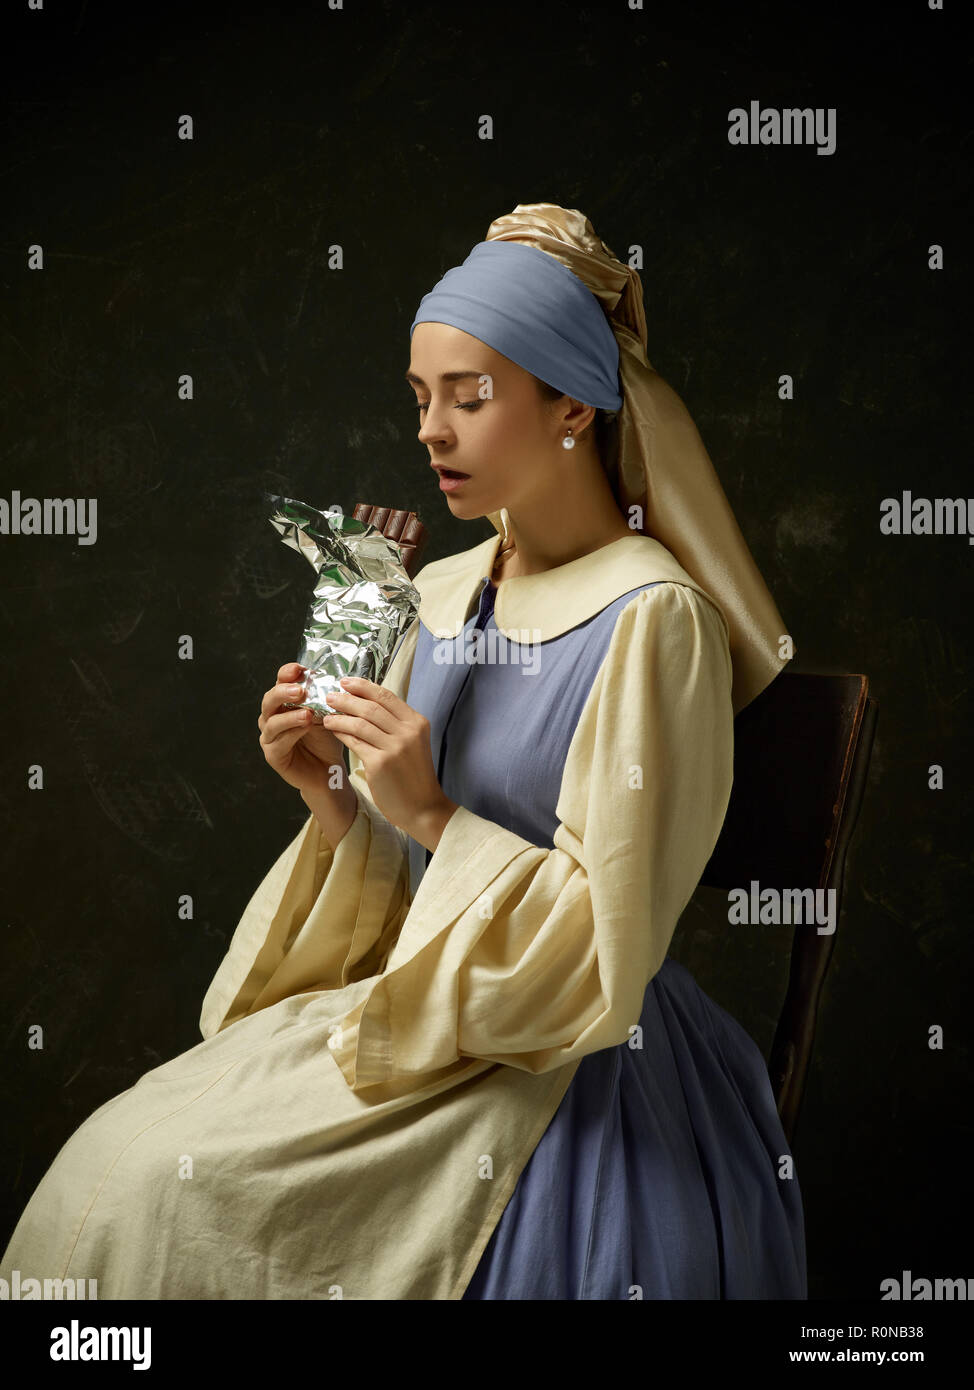 Medieval woman in historical costume wearing corset dress and